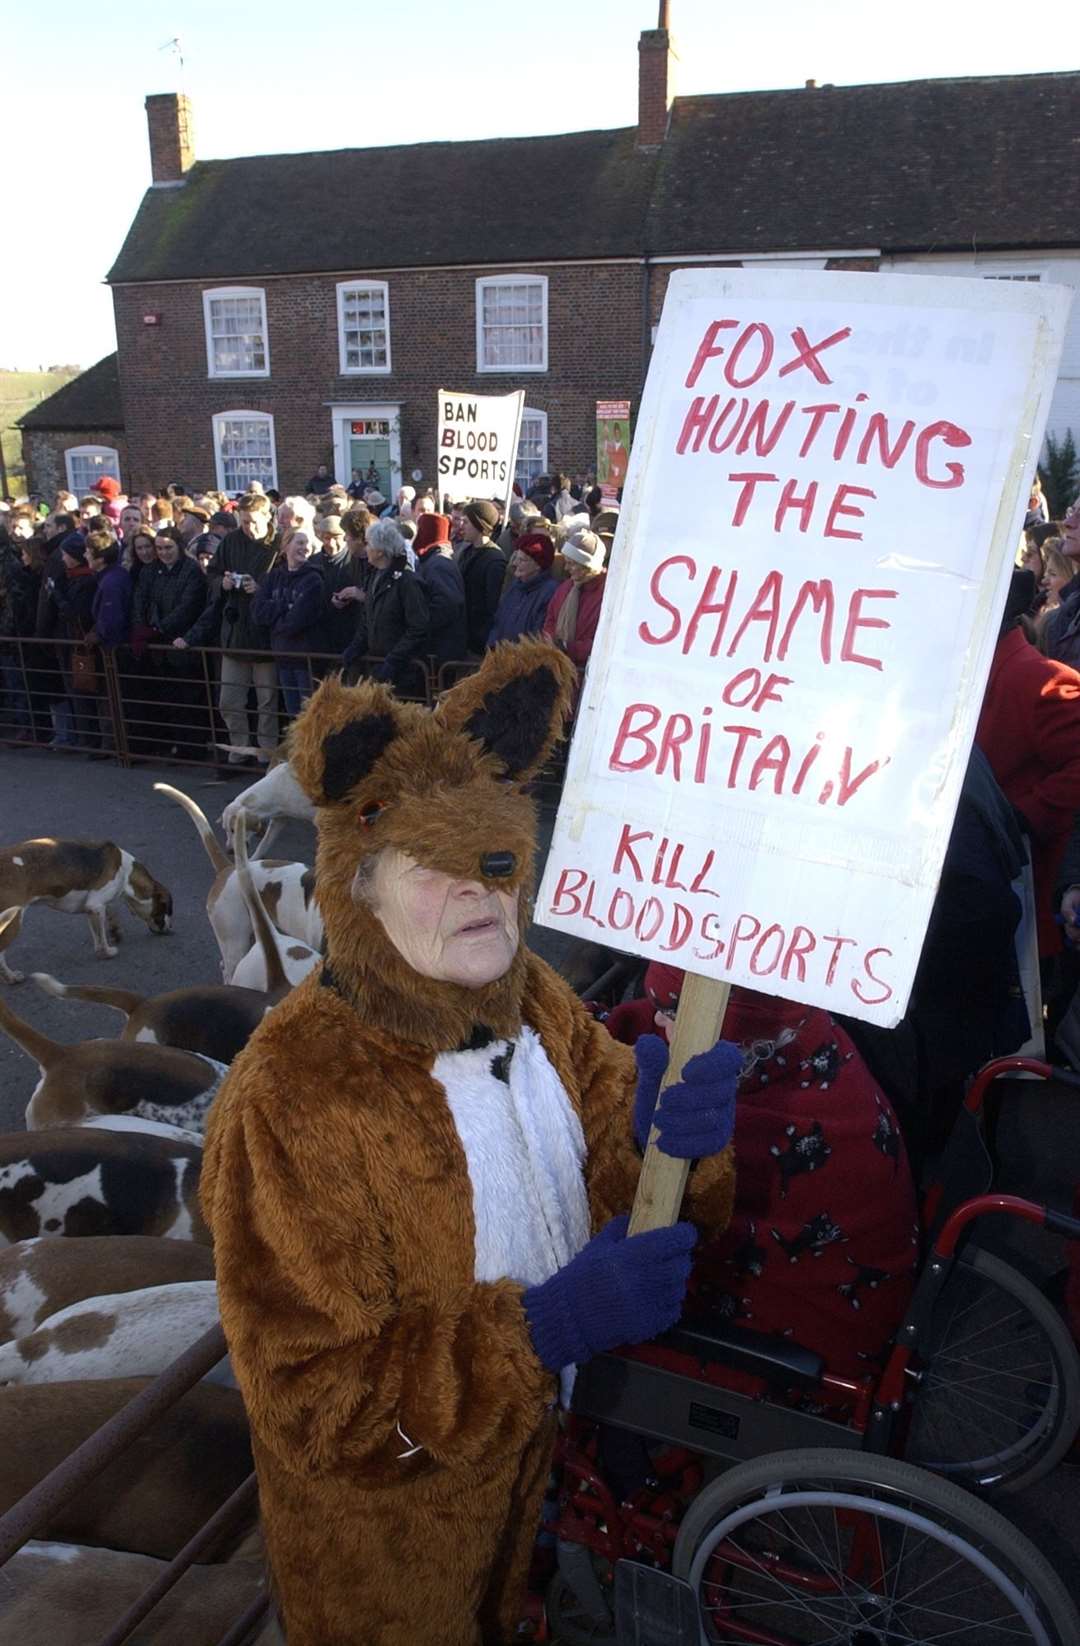 Protests as the East Kent Hunt gathers for traditional Boxing Day hunt at Elham square in 2001.